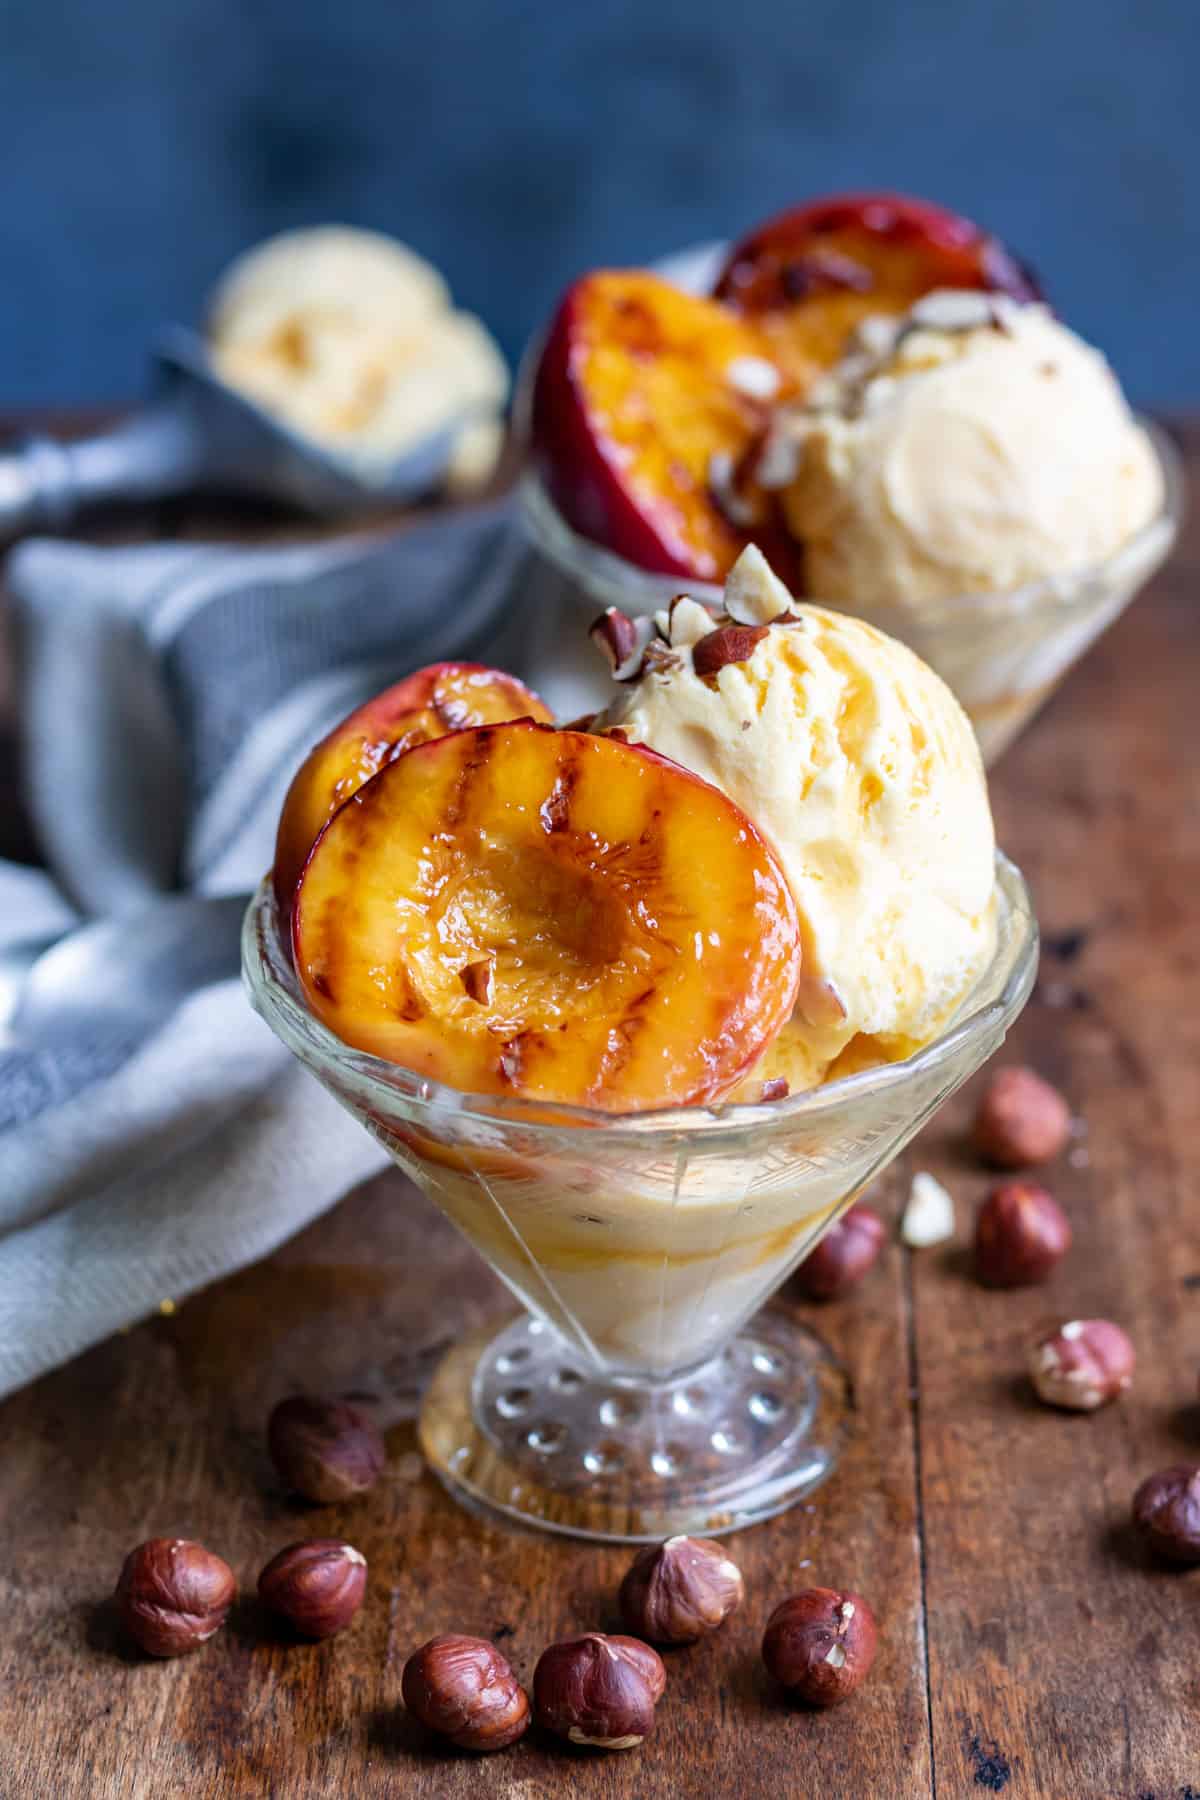 Bowls of ice cream with nectarines.